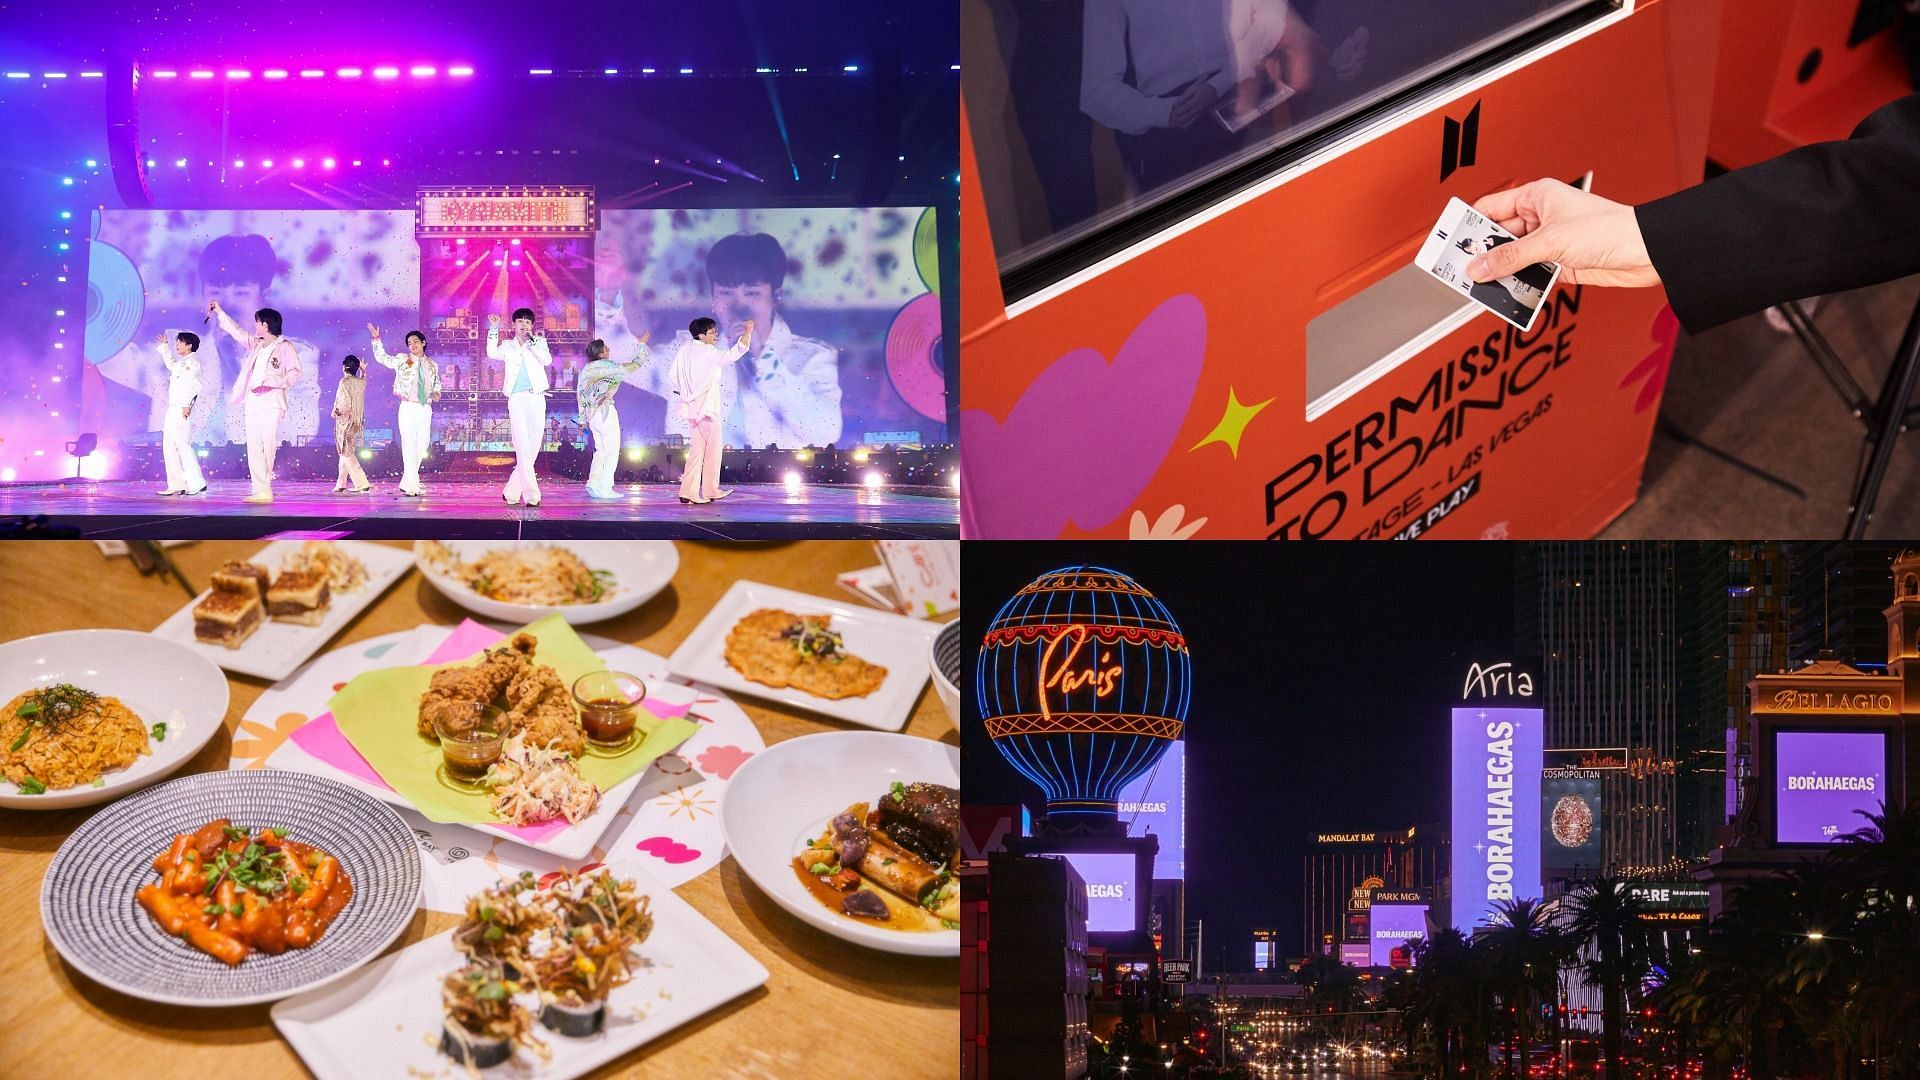 BTS Permission To Dance On Stage concert series gave fans an immersive wholesome experience (Images via BIGHIT MUSIC and HYBE Corp.)